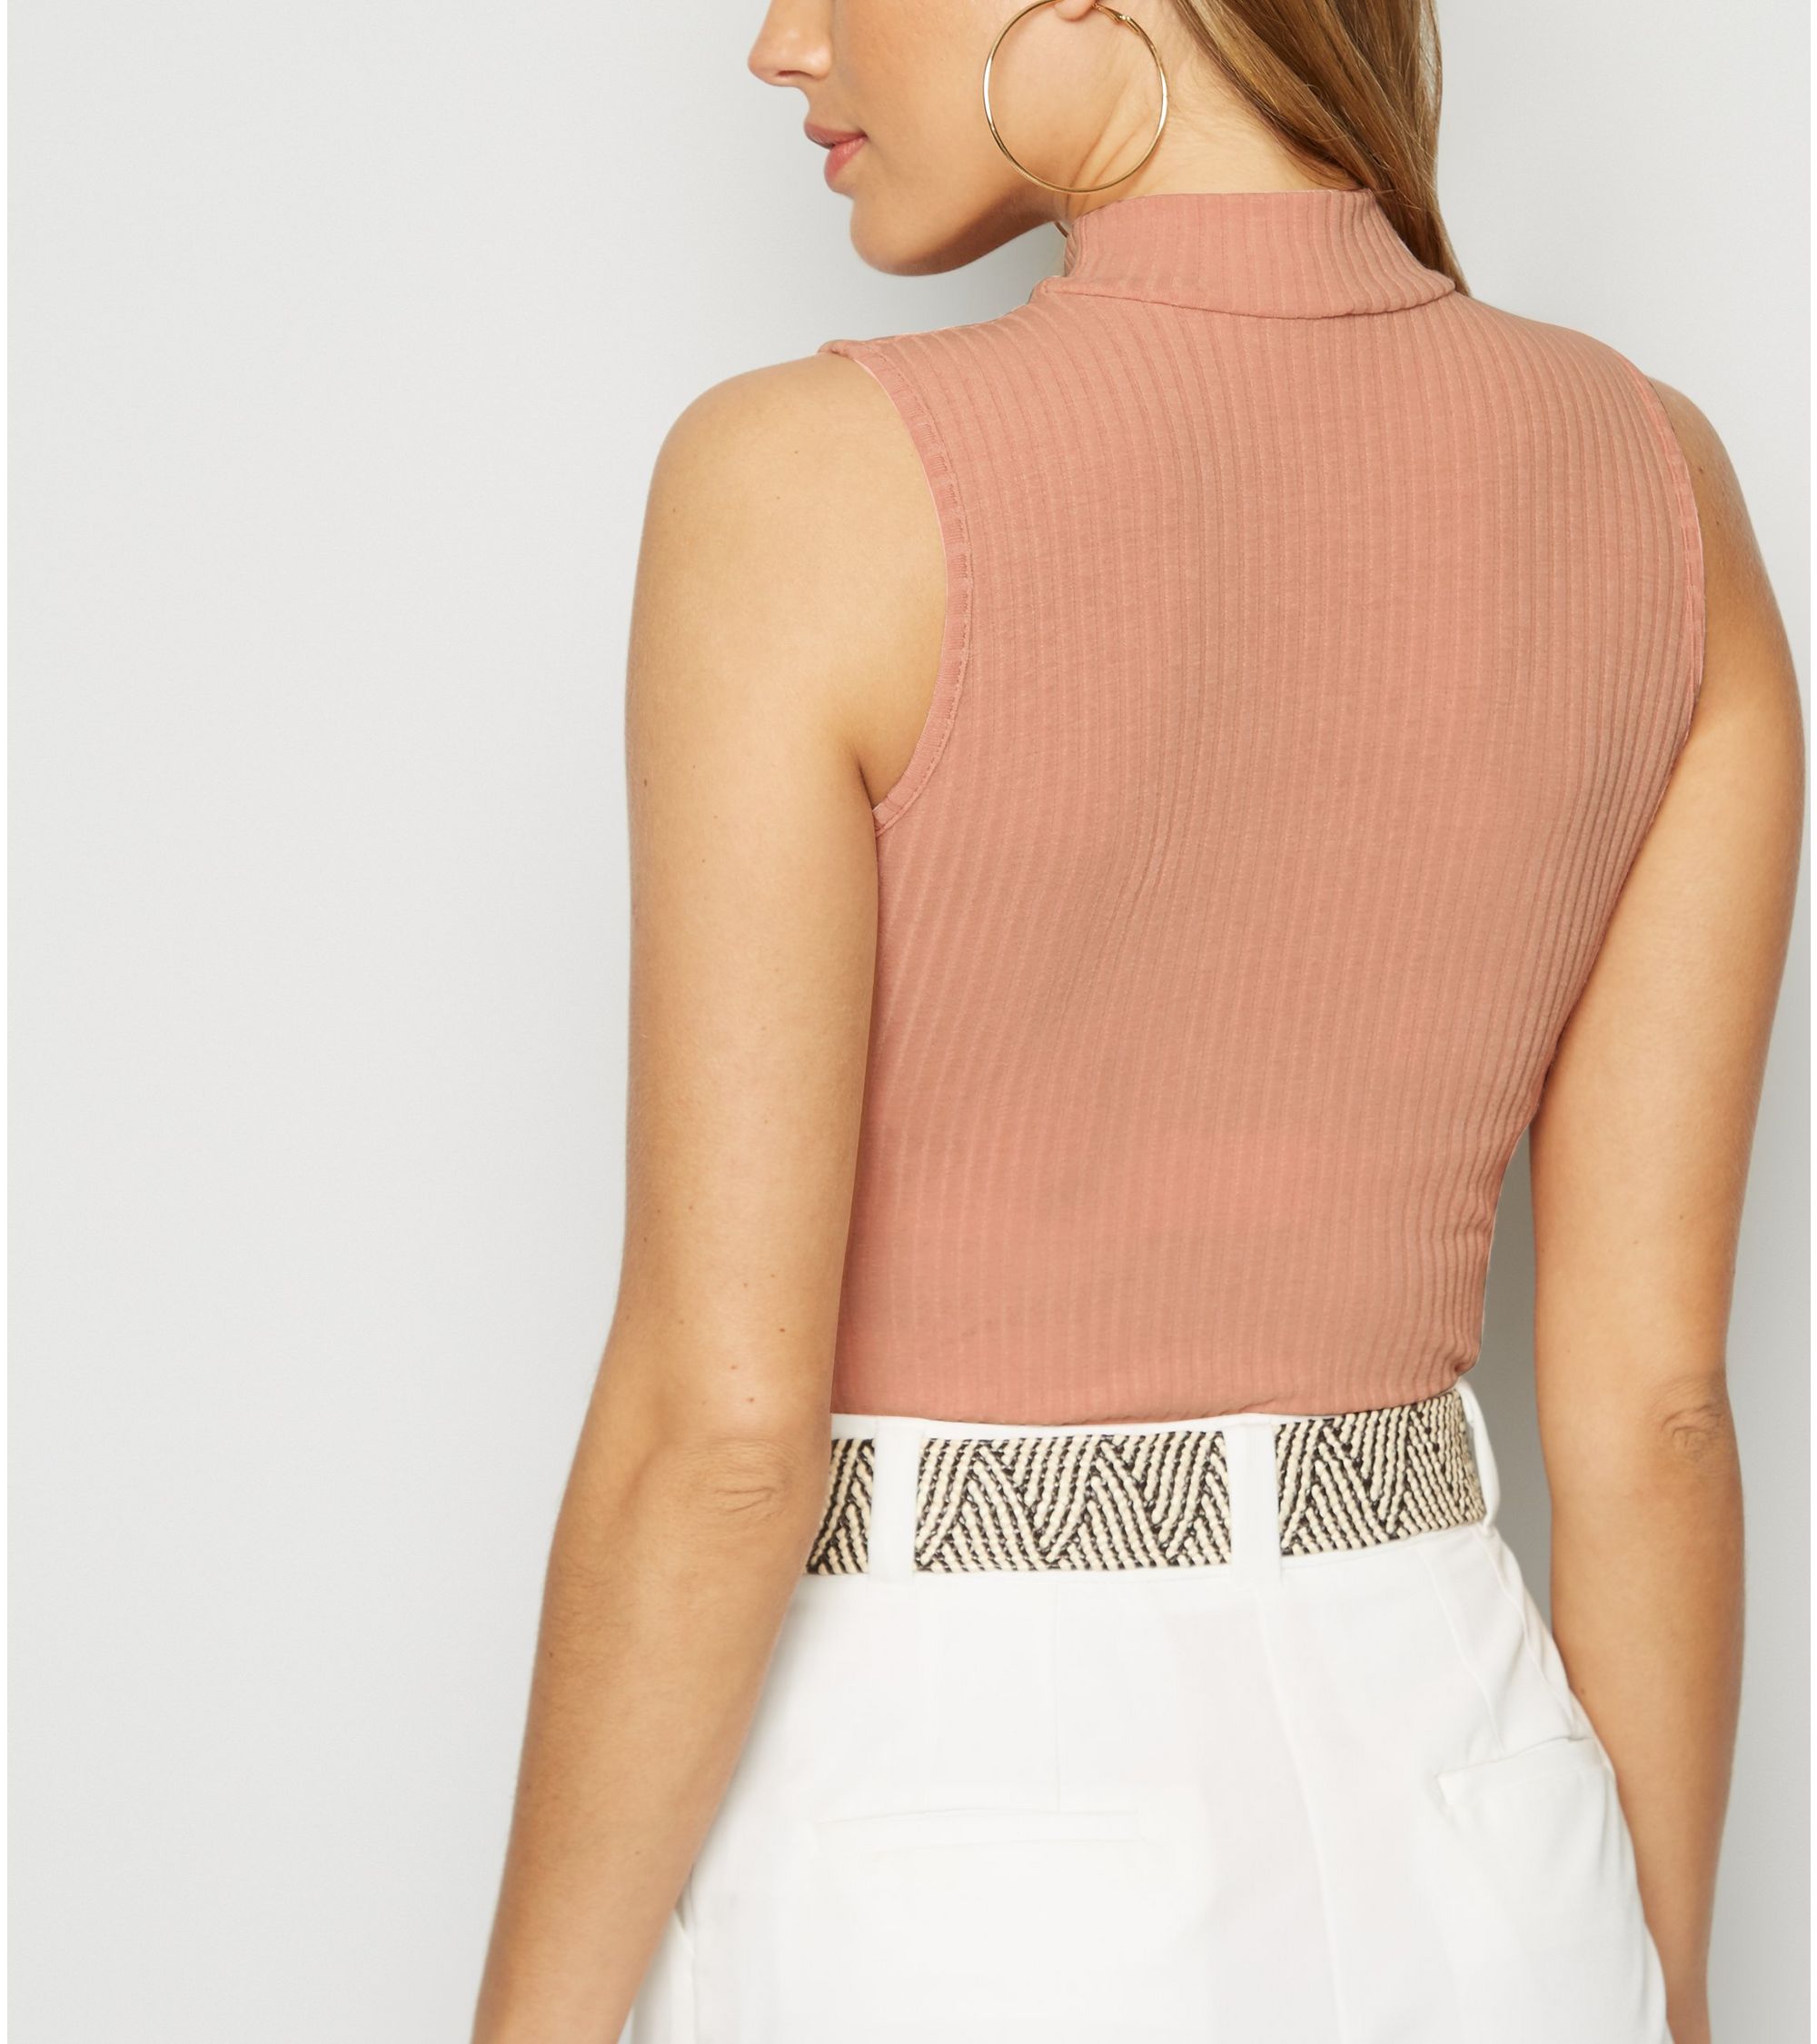 New Look ribbed sleeveless turtleneck bodysuit at £12.99 | love the brands